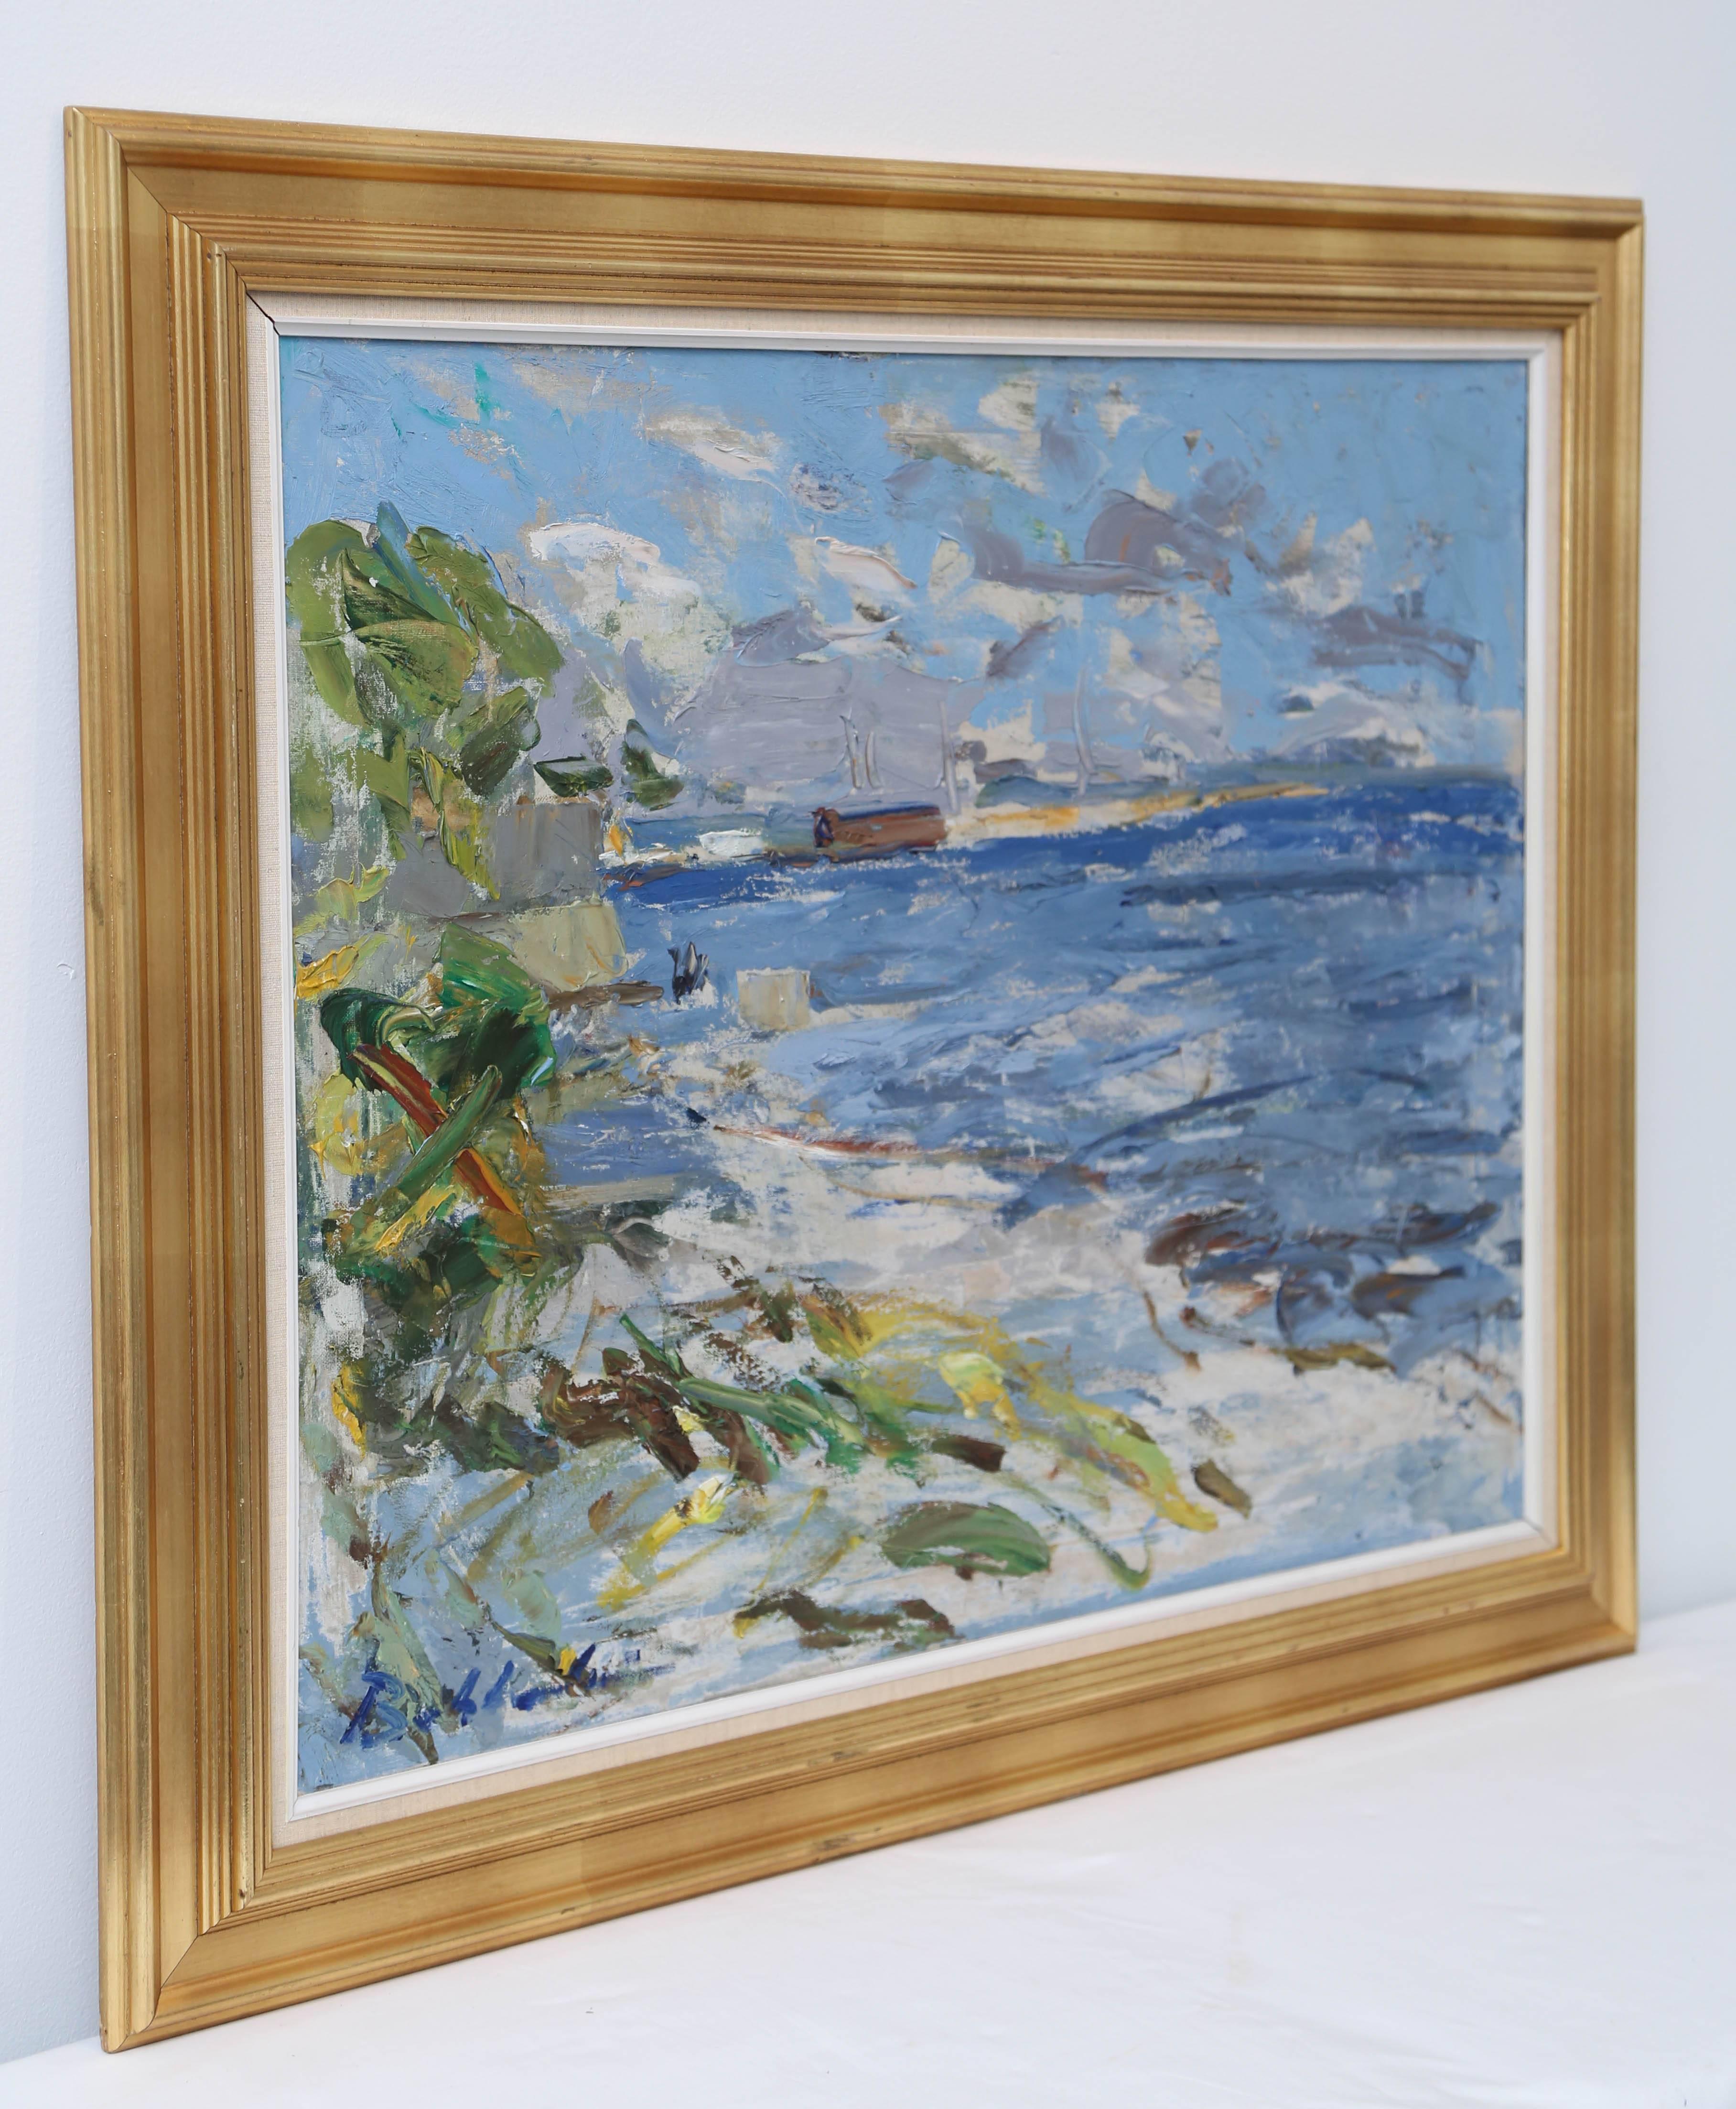 Ocean scene oil on canvas by Danish painter and sculptor Borge Bokkenheuser (1910-1976). Signed and professionally framed. A beautiful seascape painting with depth and interest.

Measures: 38.25'' wide
32.75''high
1.5''deep.